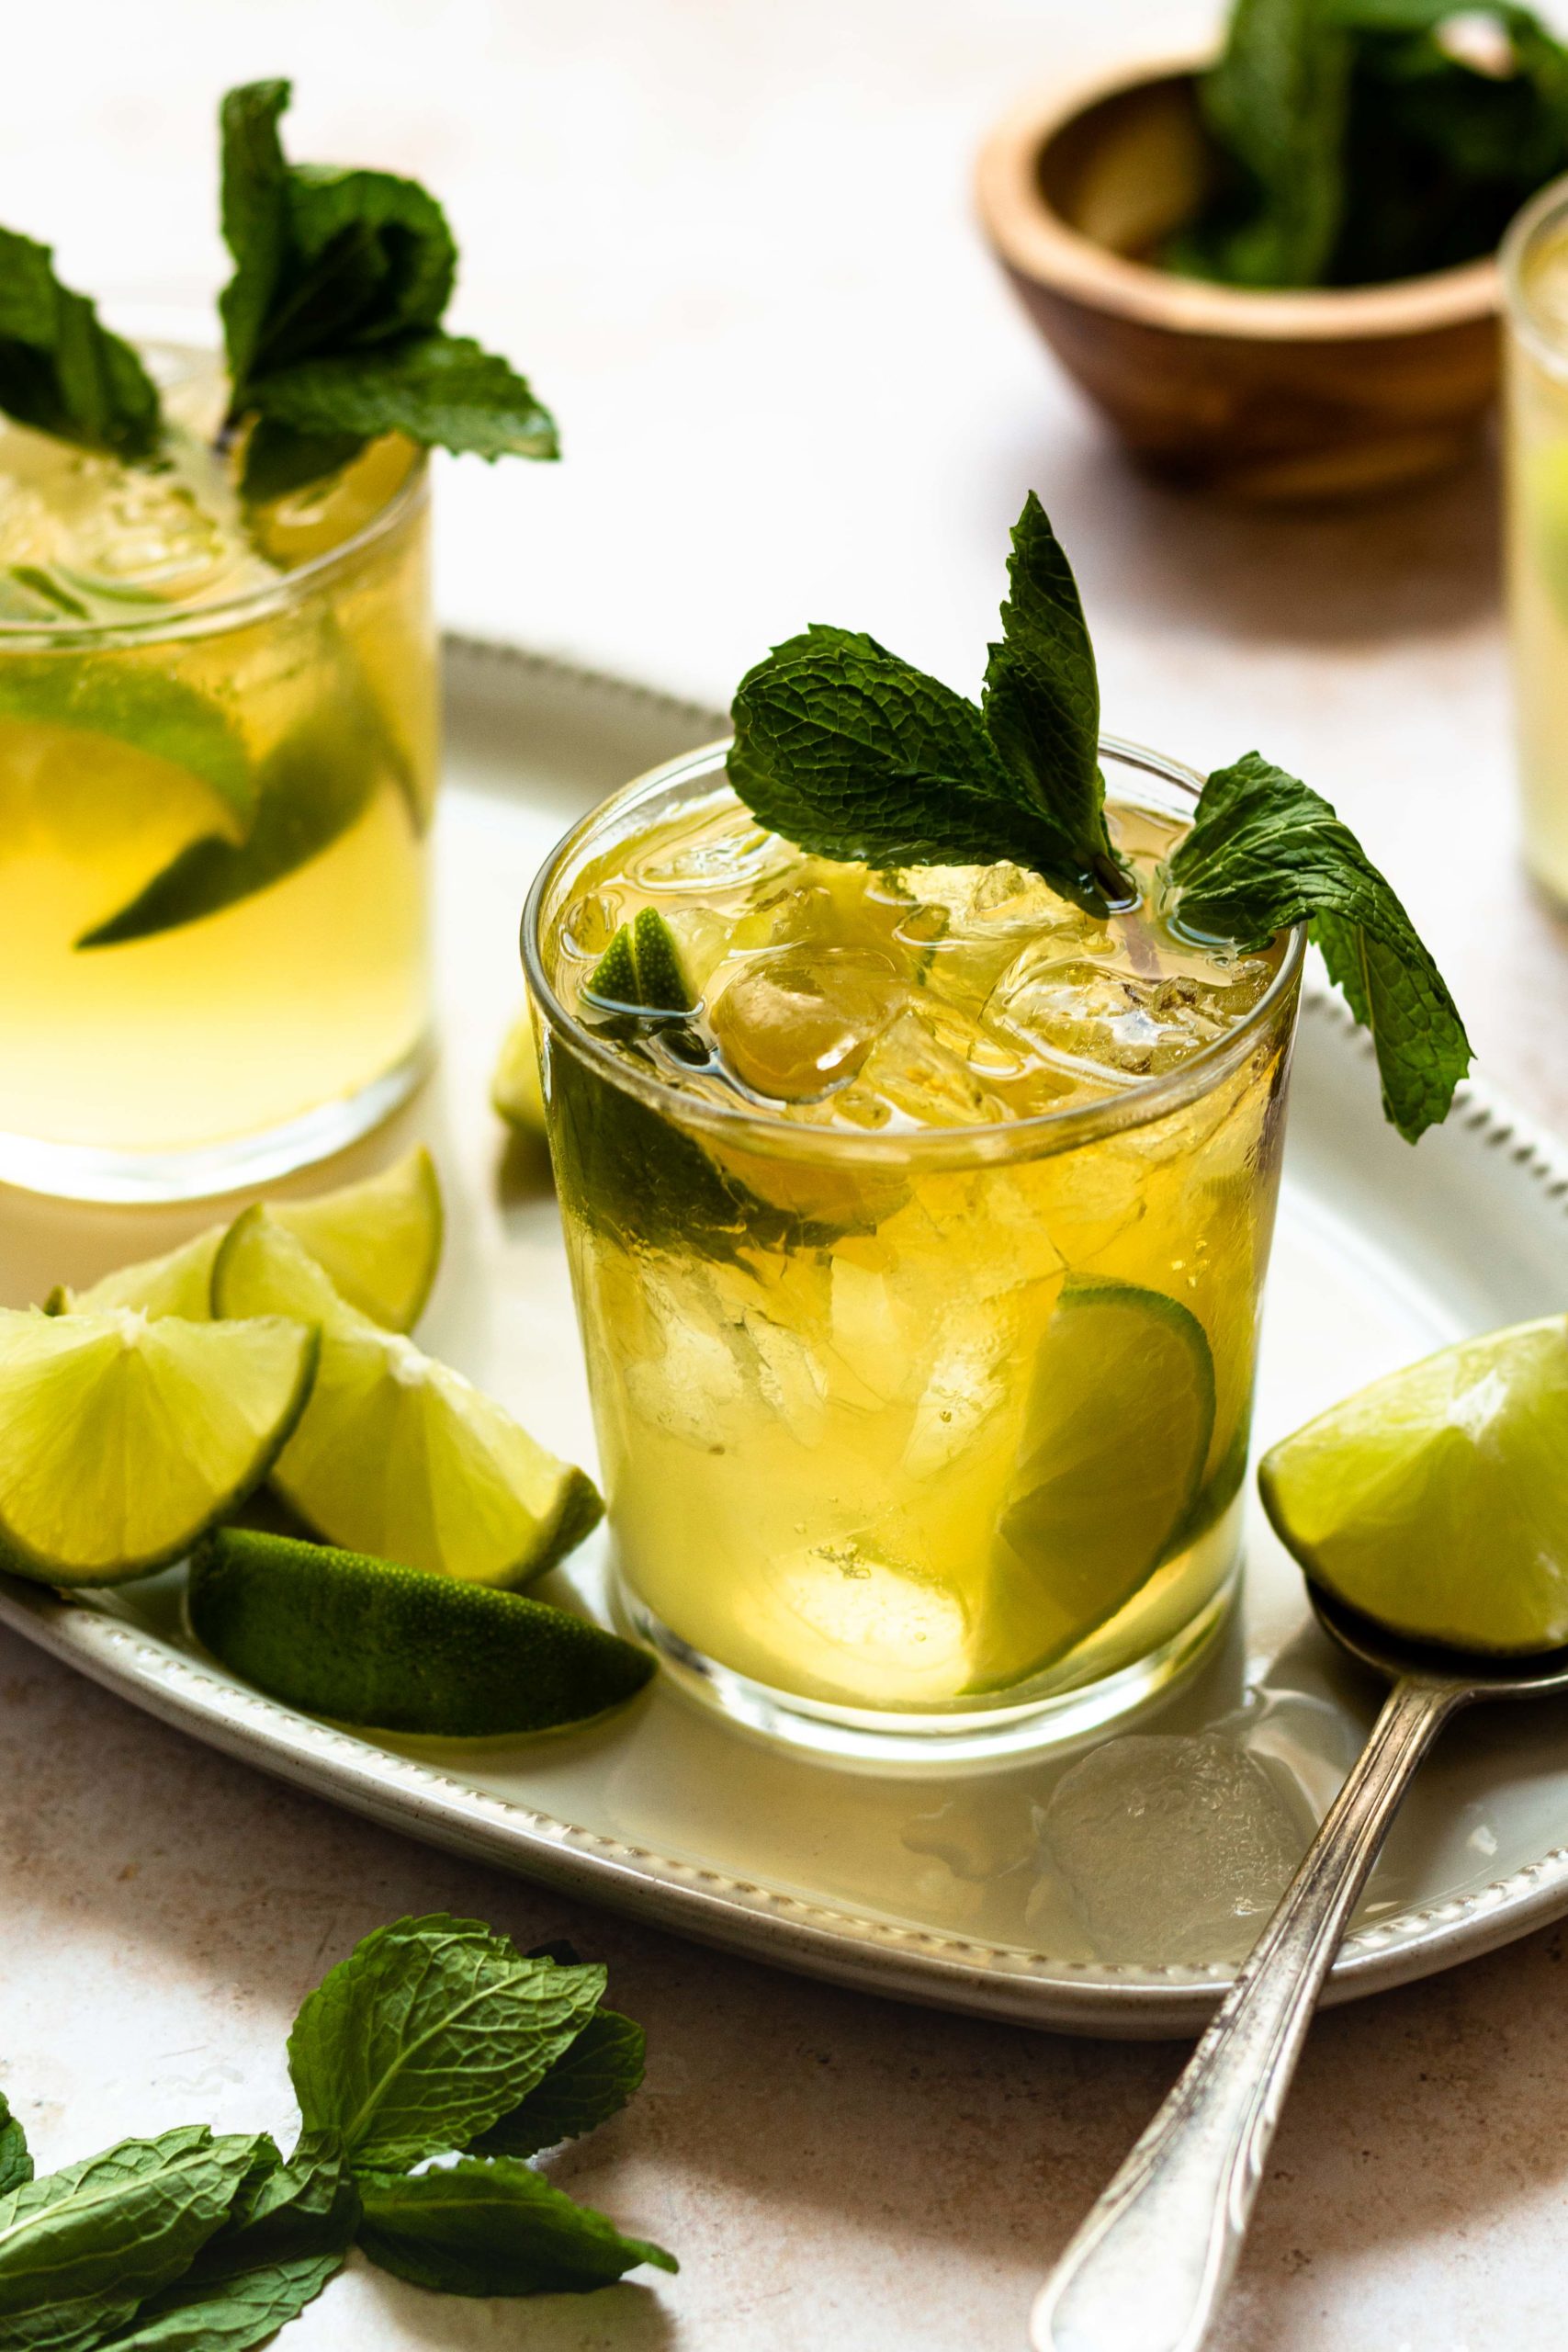 Everything you love about a mojito but with ginger and whiskey! Mint and lime muddled together and mixed with Irish whiskey and ginger beer to create a tasty and refreshing drink for St. Patrick’s Day or any day!